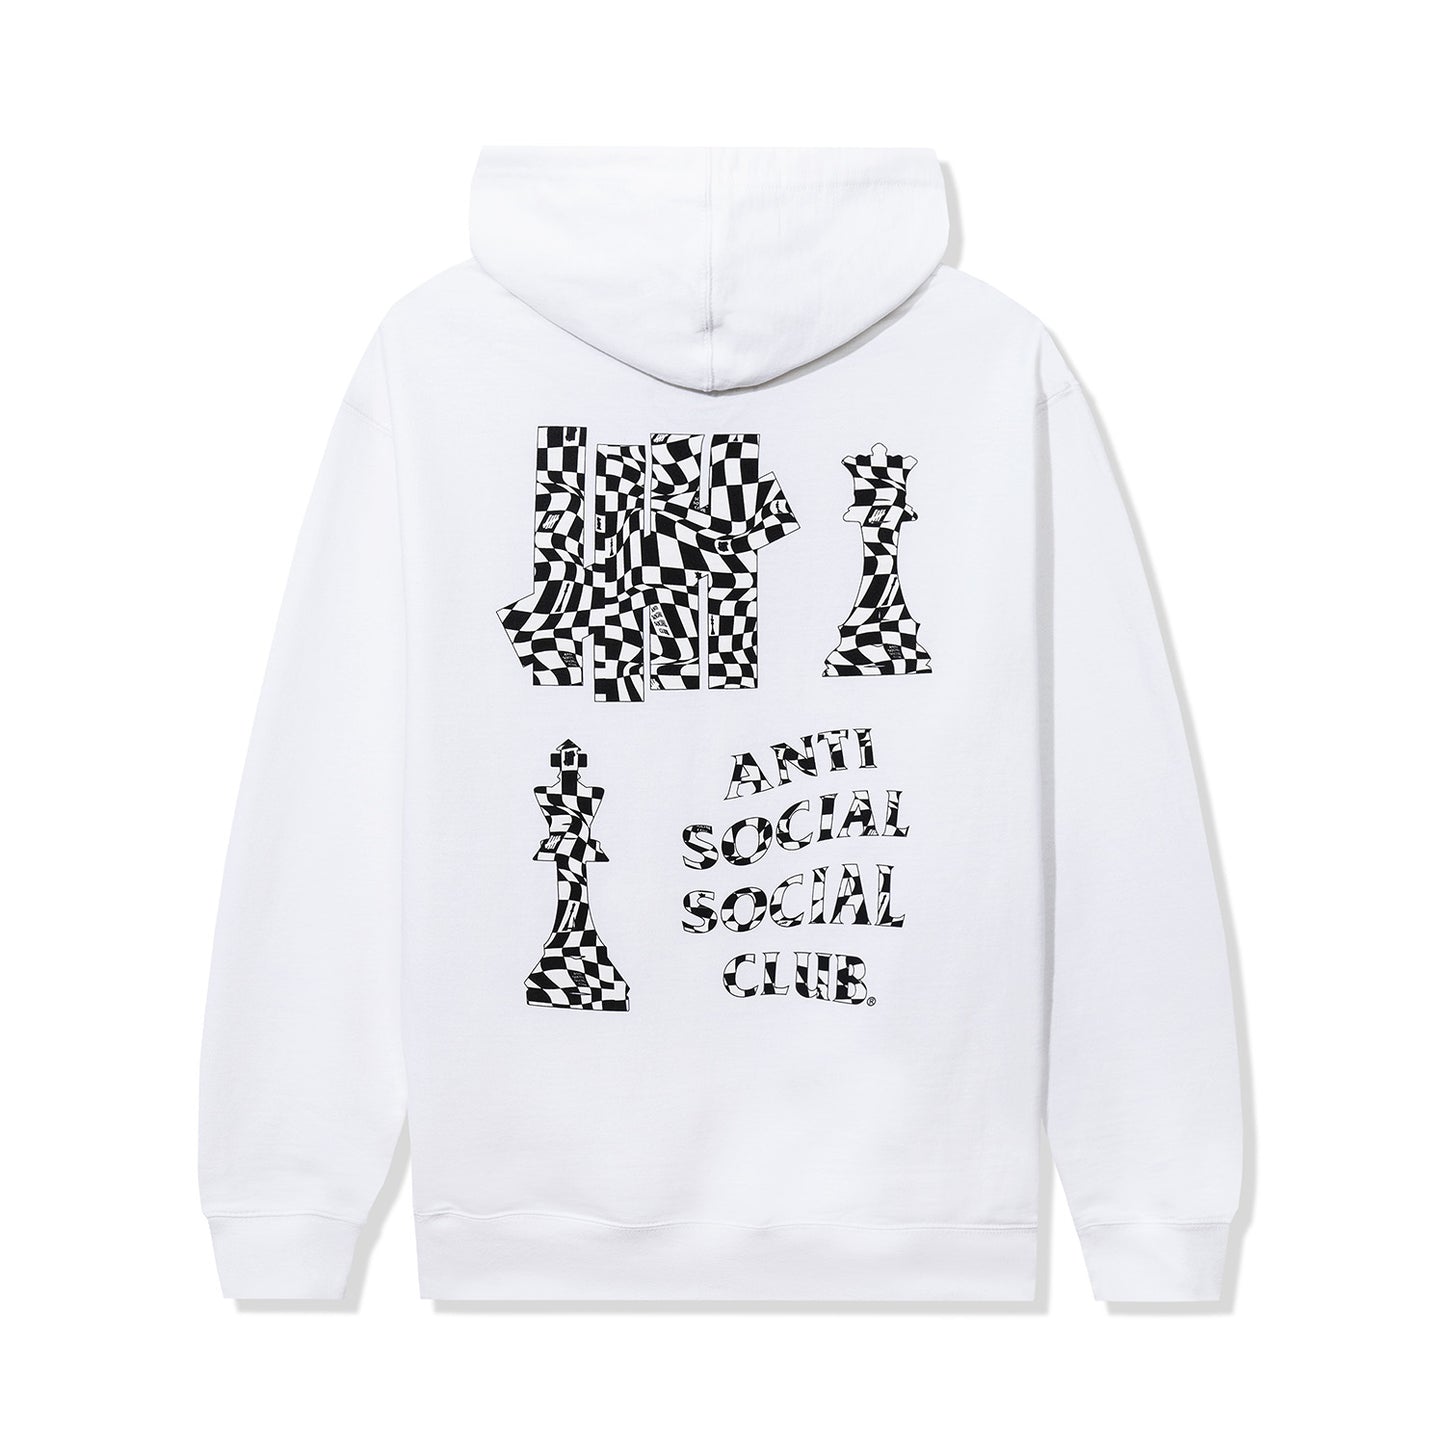 ASSC x Undefeated Submission Hoodie - White